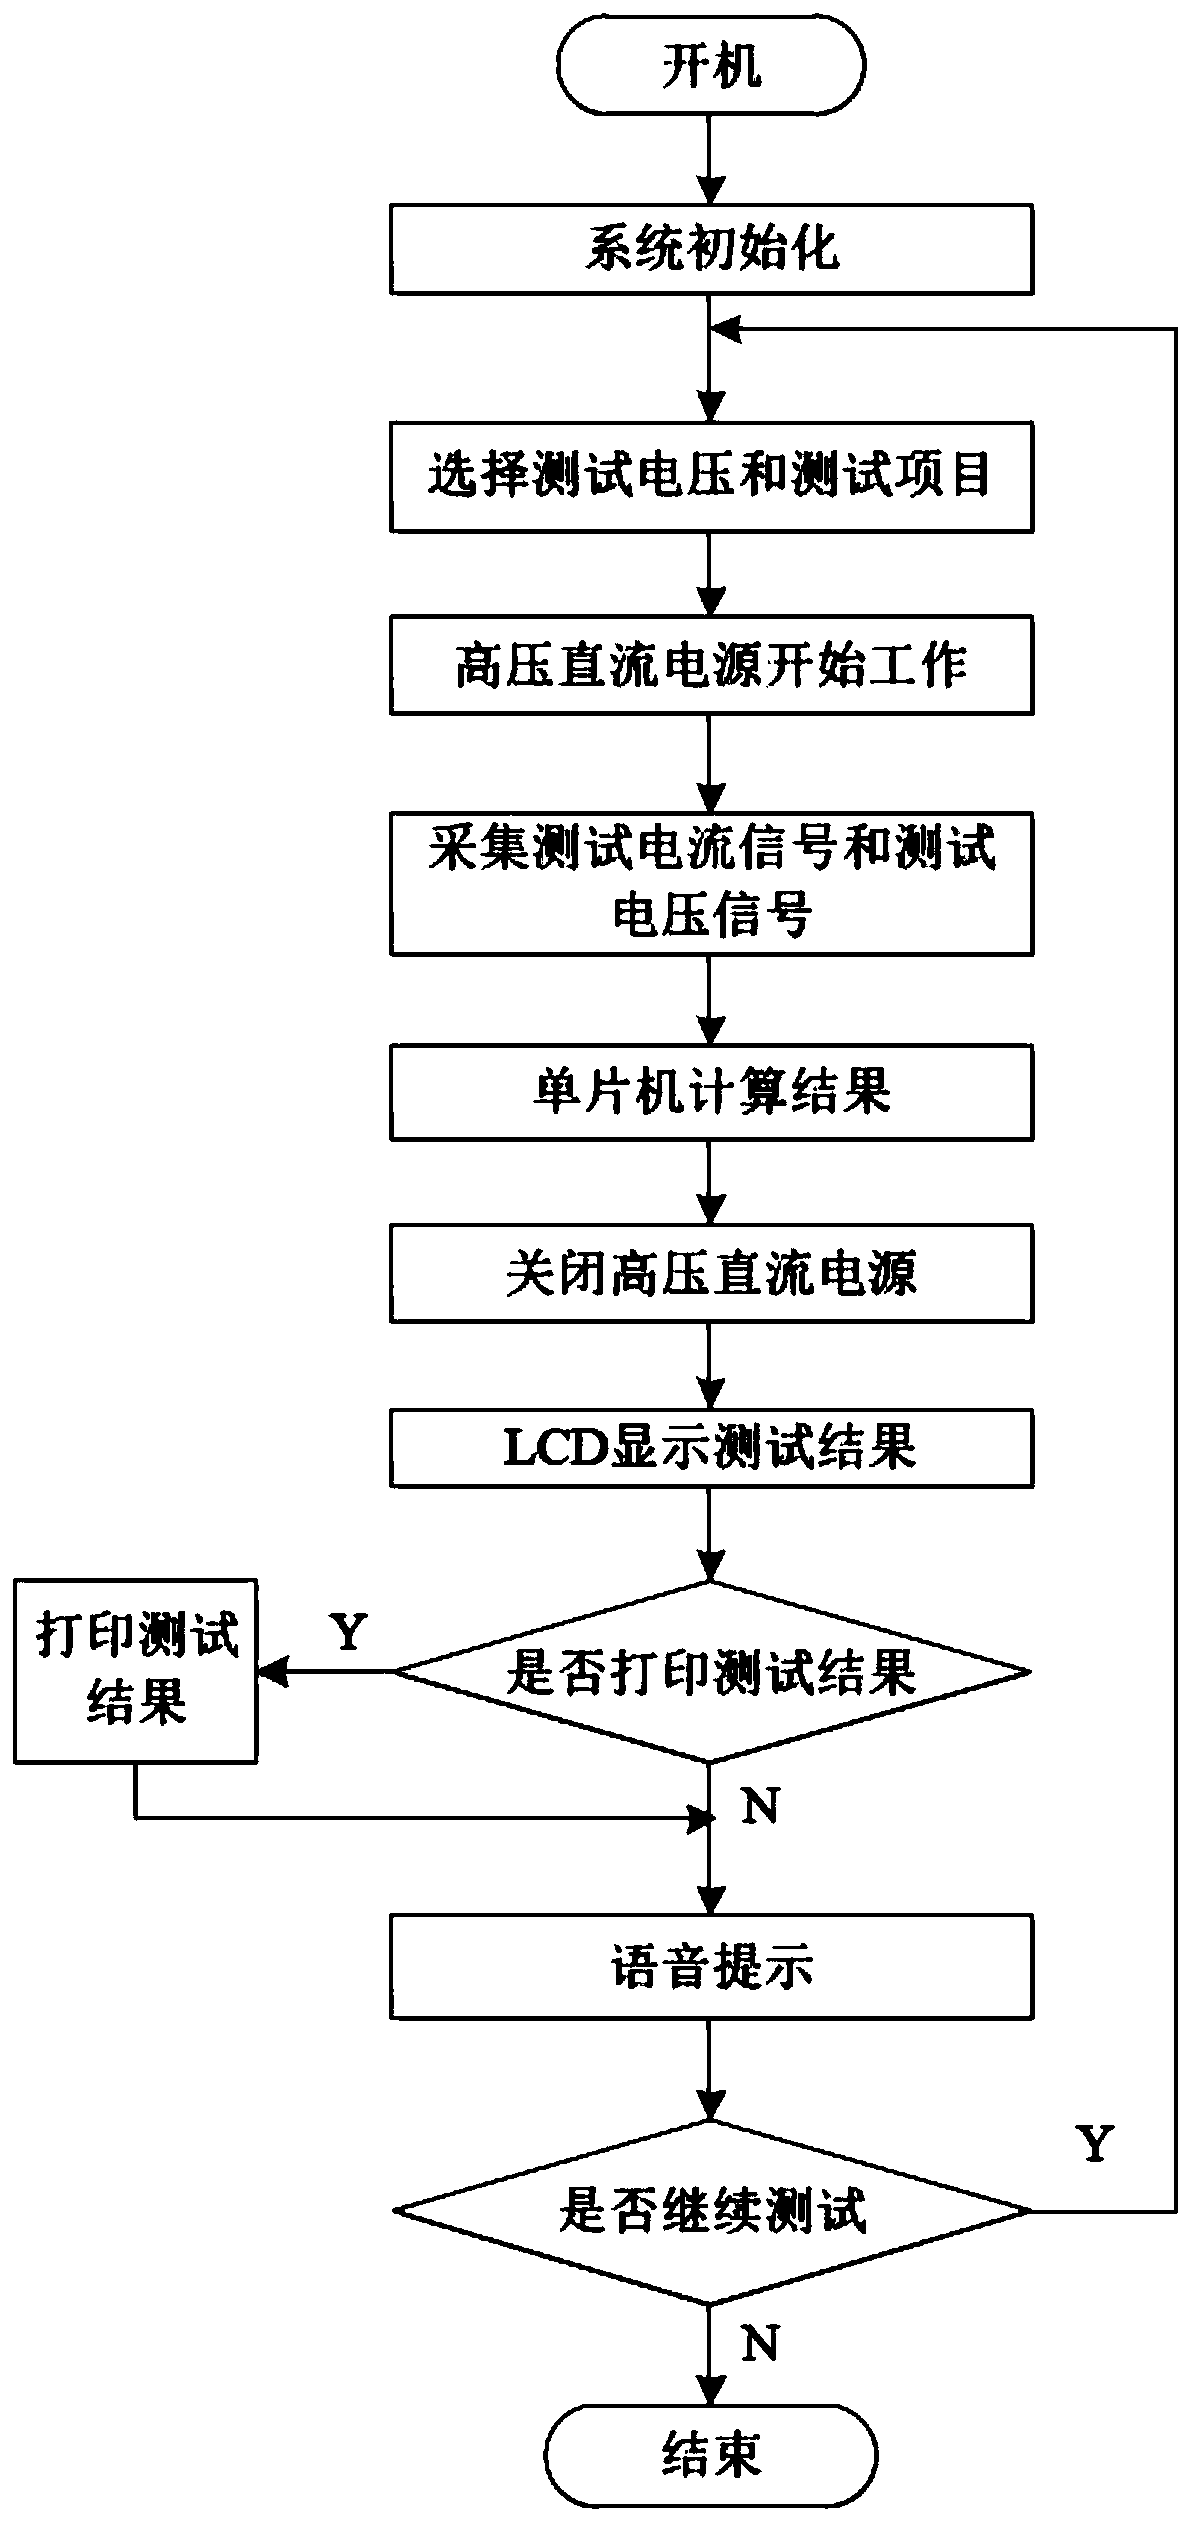 Remote online testing device and method for insulation data of mining electrical equipment